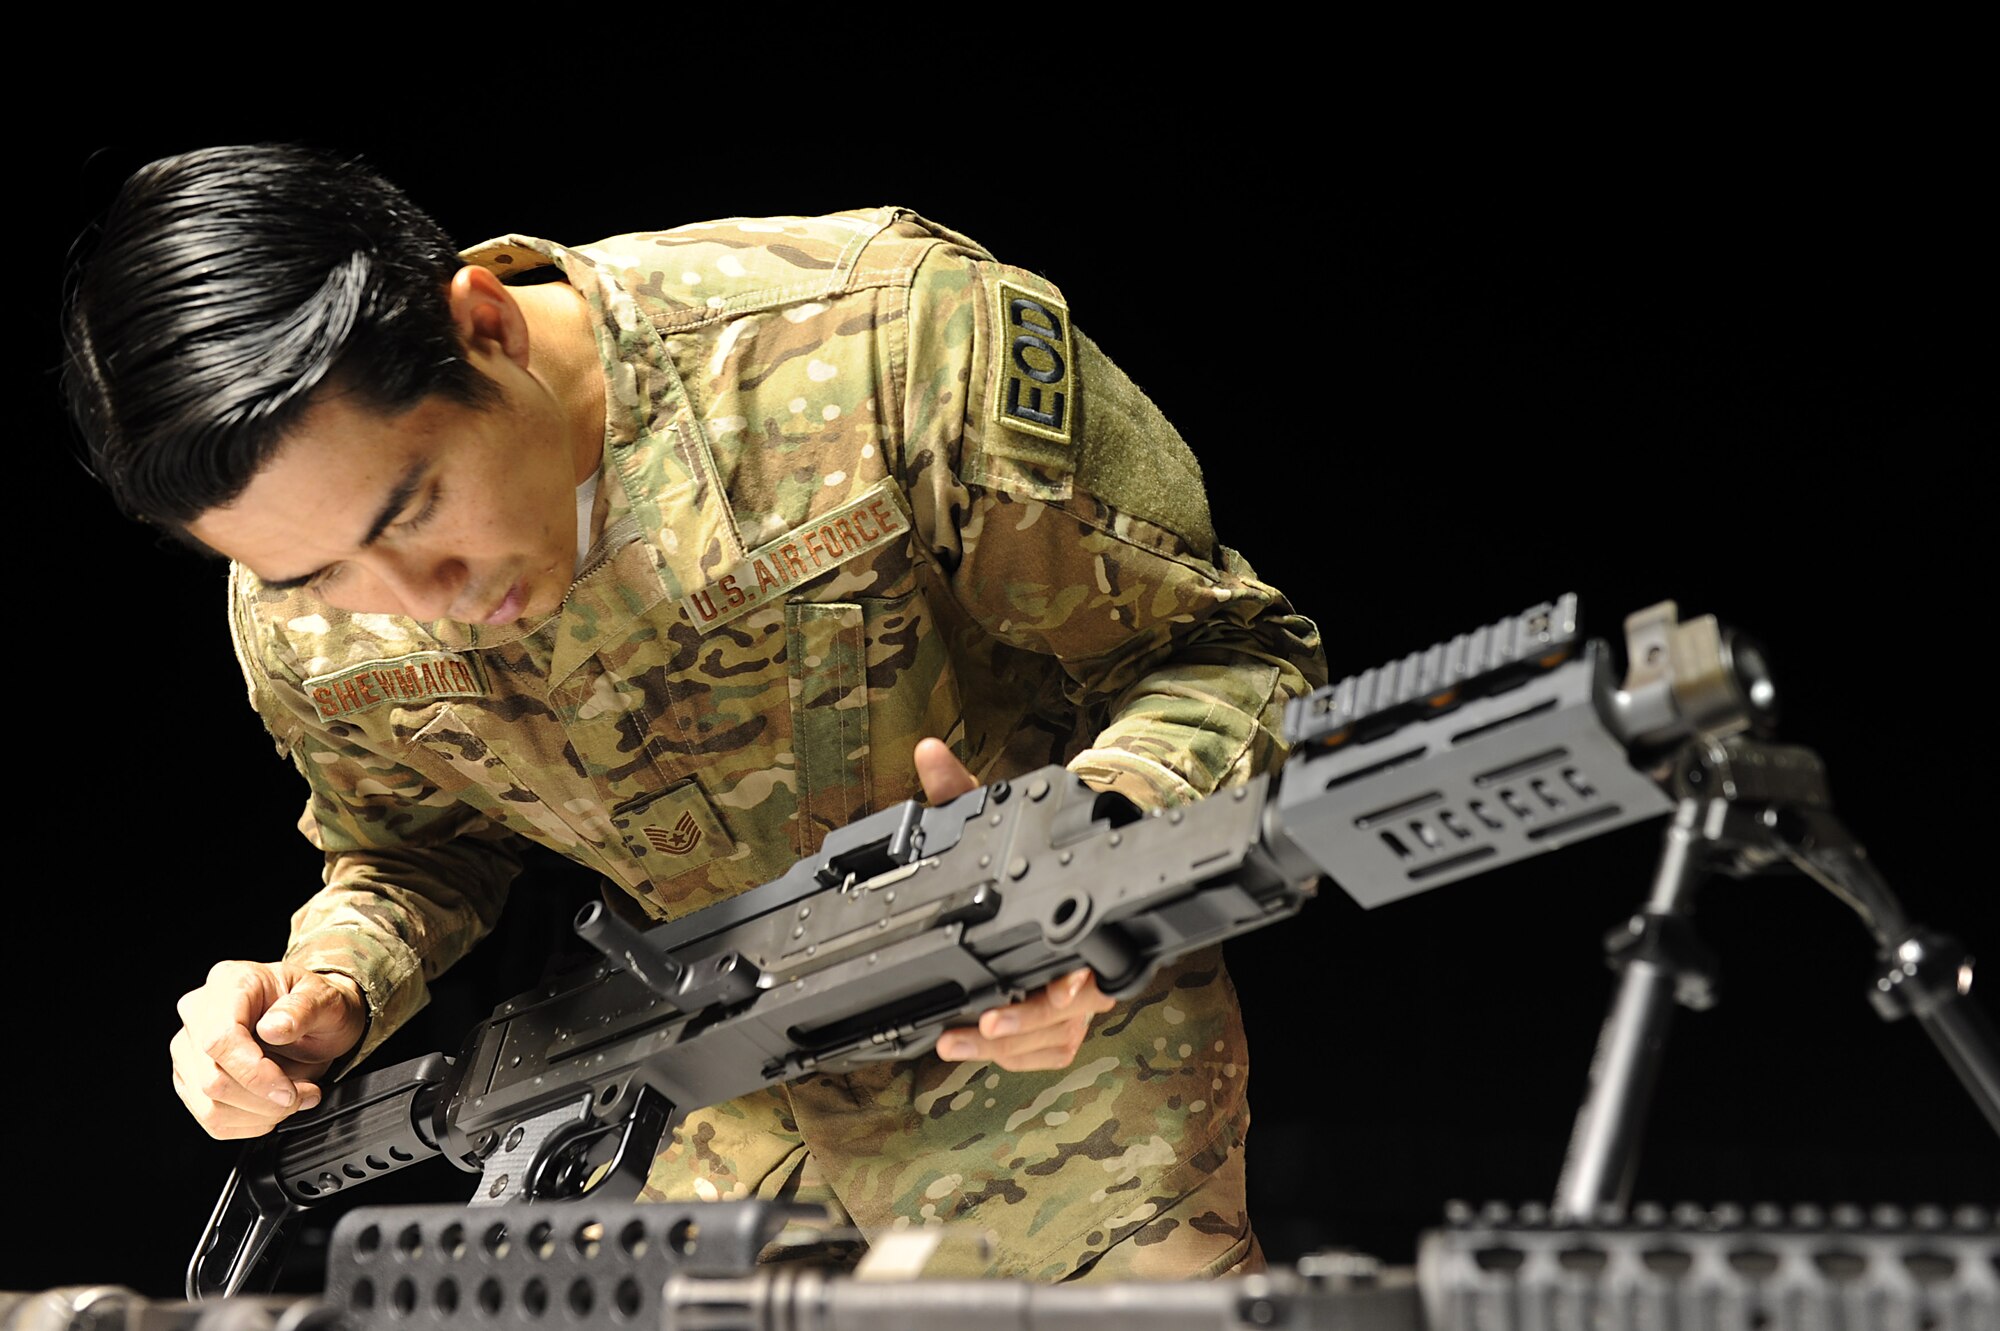 U.S. Air Force Tech. Sgt. Charles Shewmaker, 633rd Civil Engineer Squadron Explosives Ordinance Disposal team lead prepares an M240B machine gun for a weapons familiarization training during Operation Llama Fury 3.0 at Joint Base Langley-Eustis, Va., Aug. 10, 2017. During the final day of OLF 3.0., the EOD teams participated in a variety of skill and knowledge stations, where they competed for the OLF 3.0 trophy. (U.S. Air Force photo/Staff Sgt. Brittany E. N. Murphy)